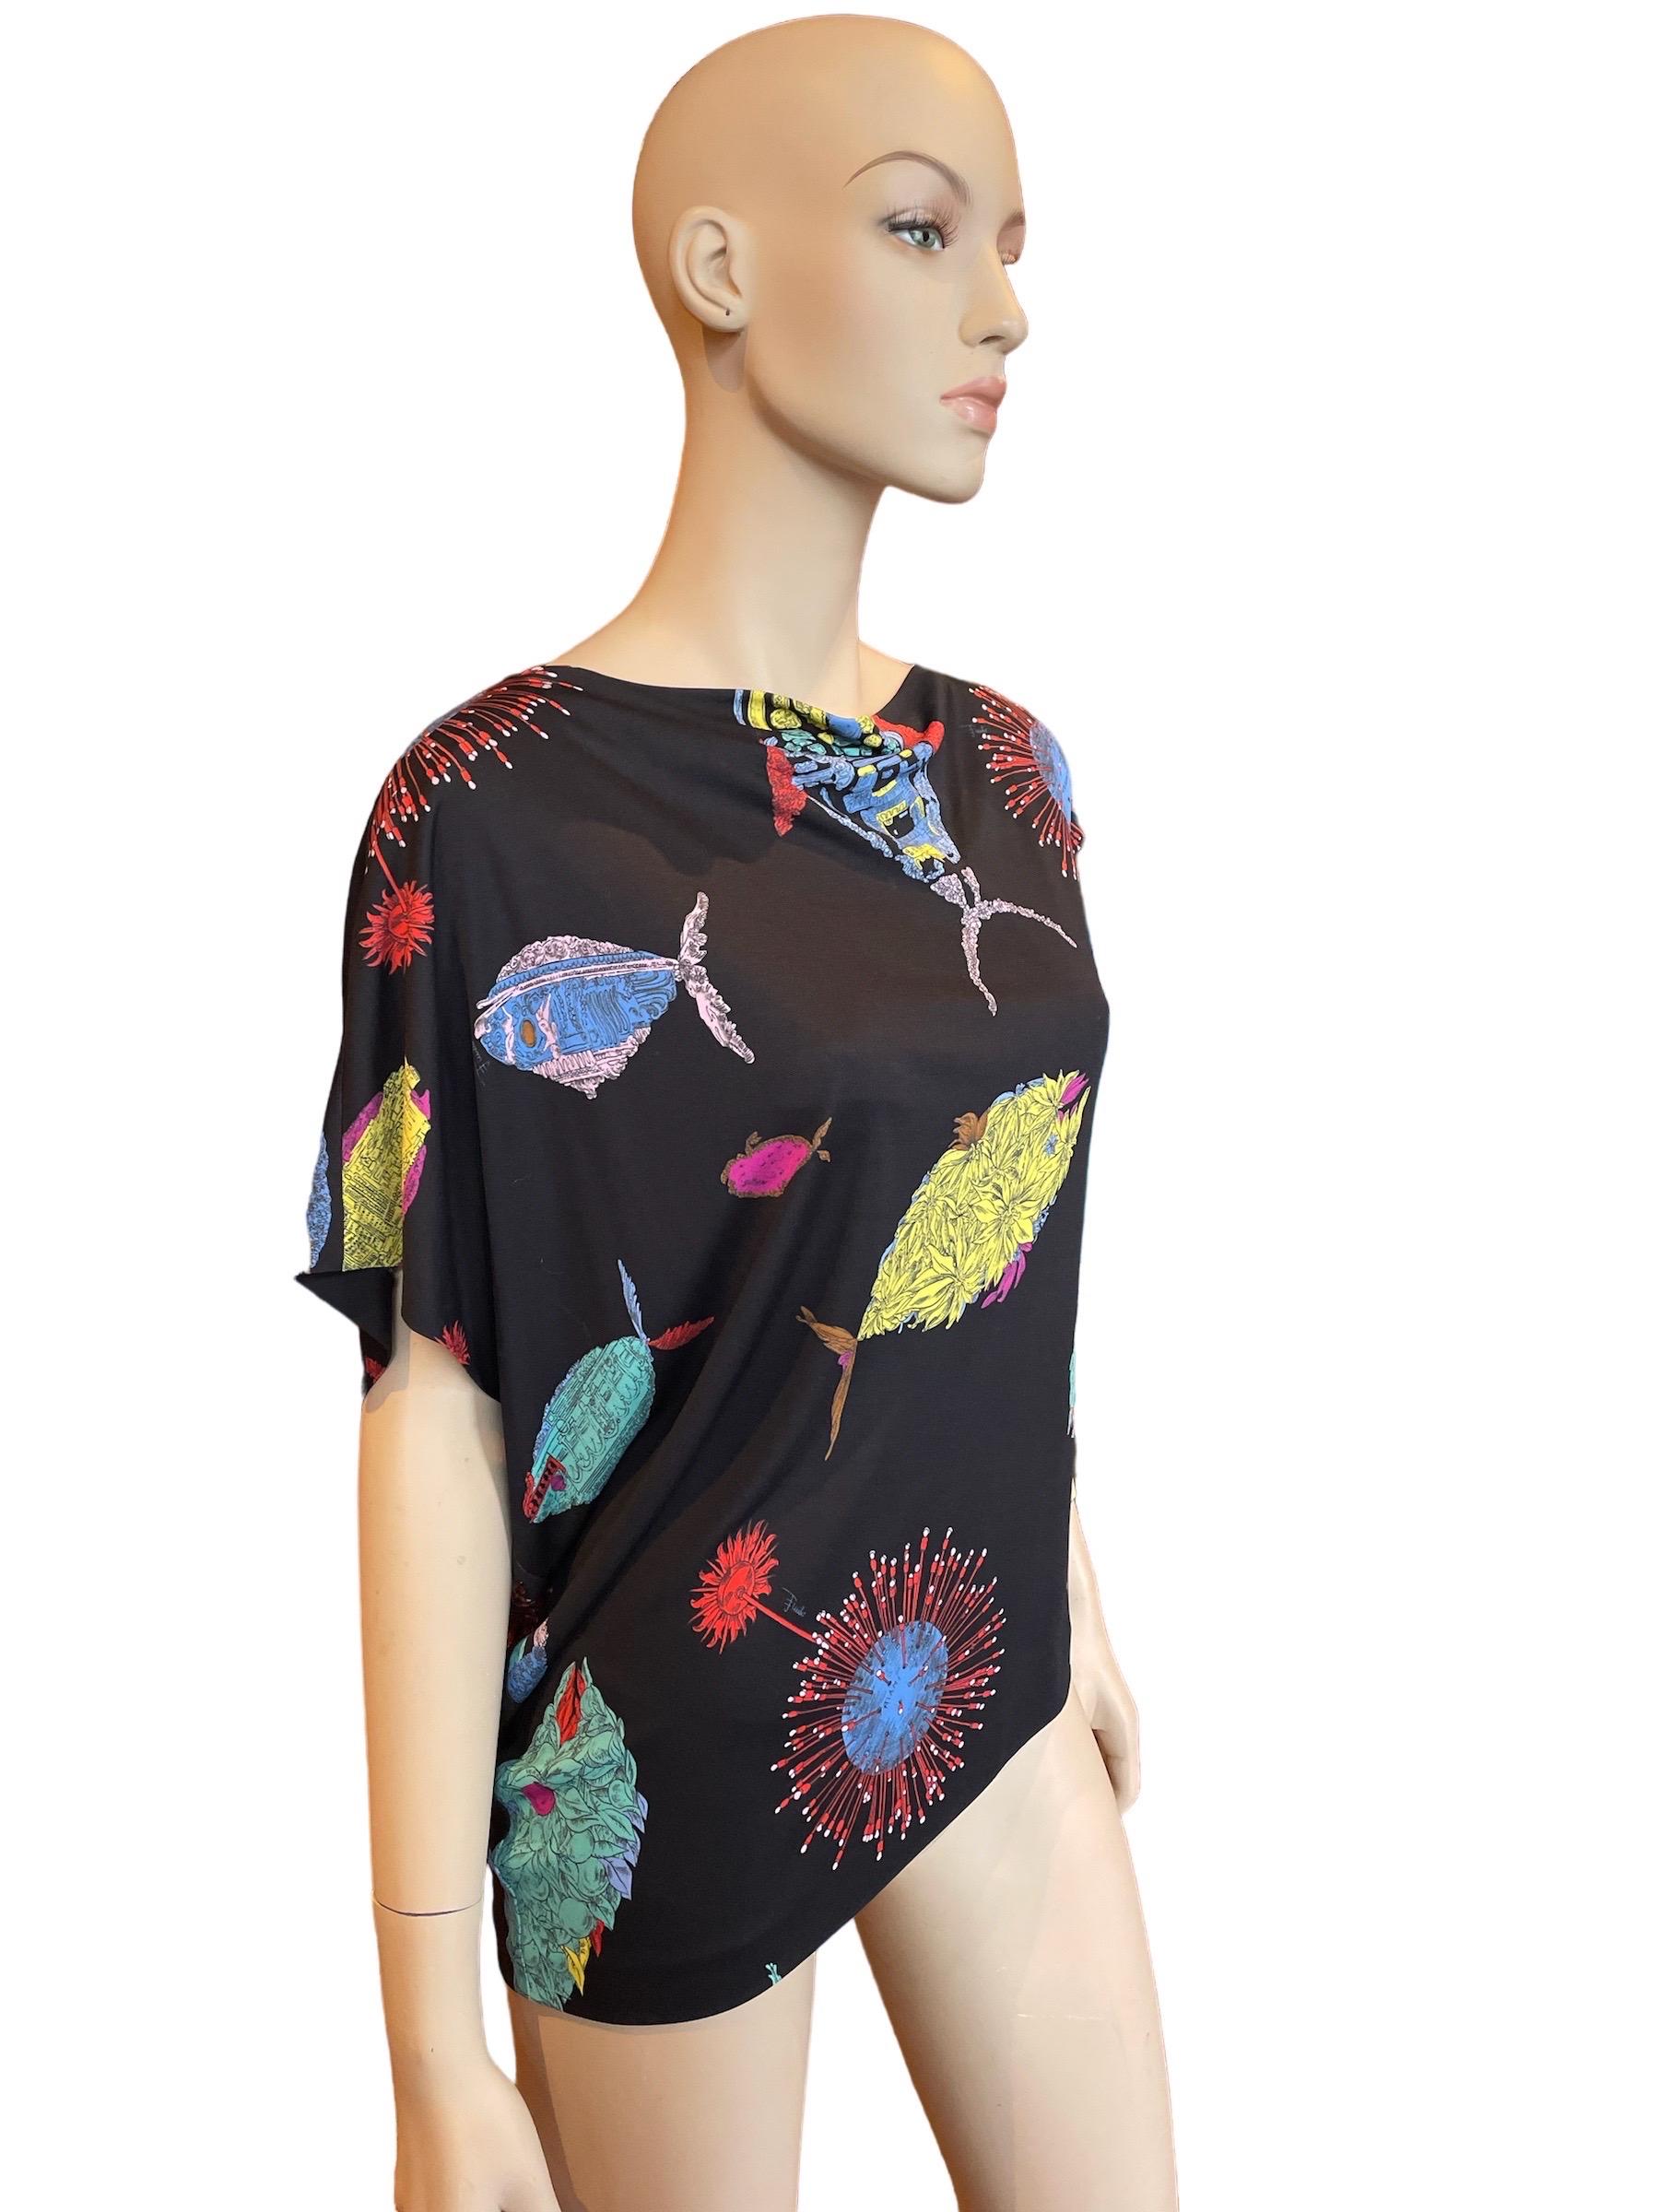 Vintage Emilio Pucci Burdines Print Blouse  In Good Condition For Sale In Greenport, NY